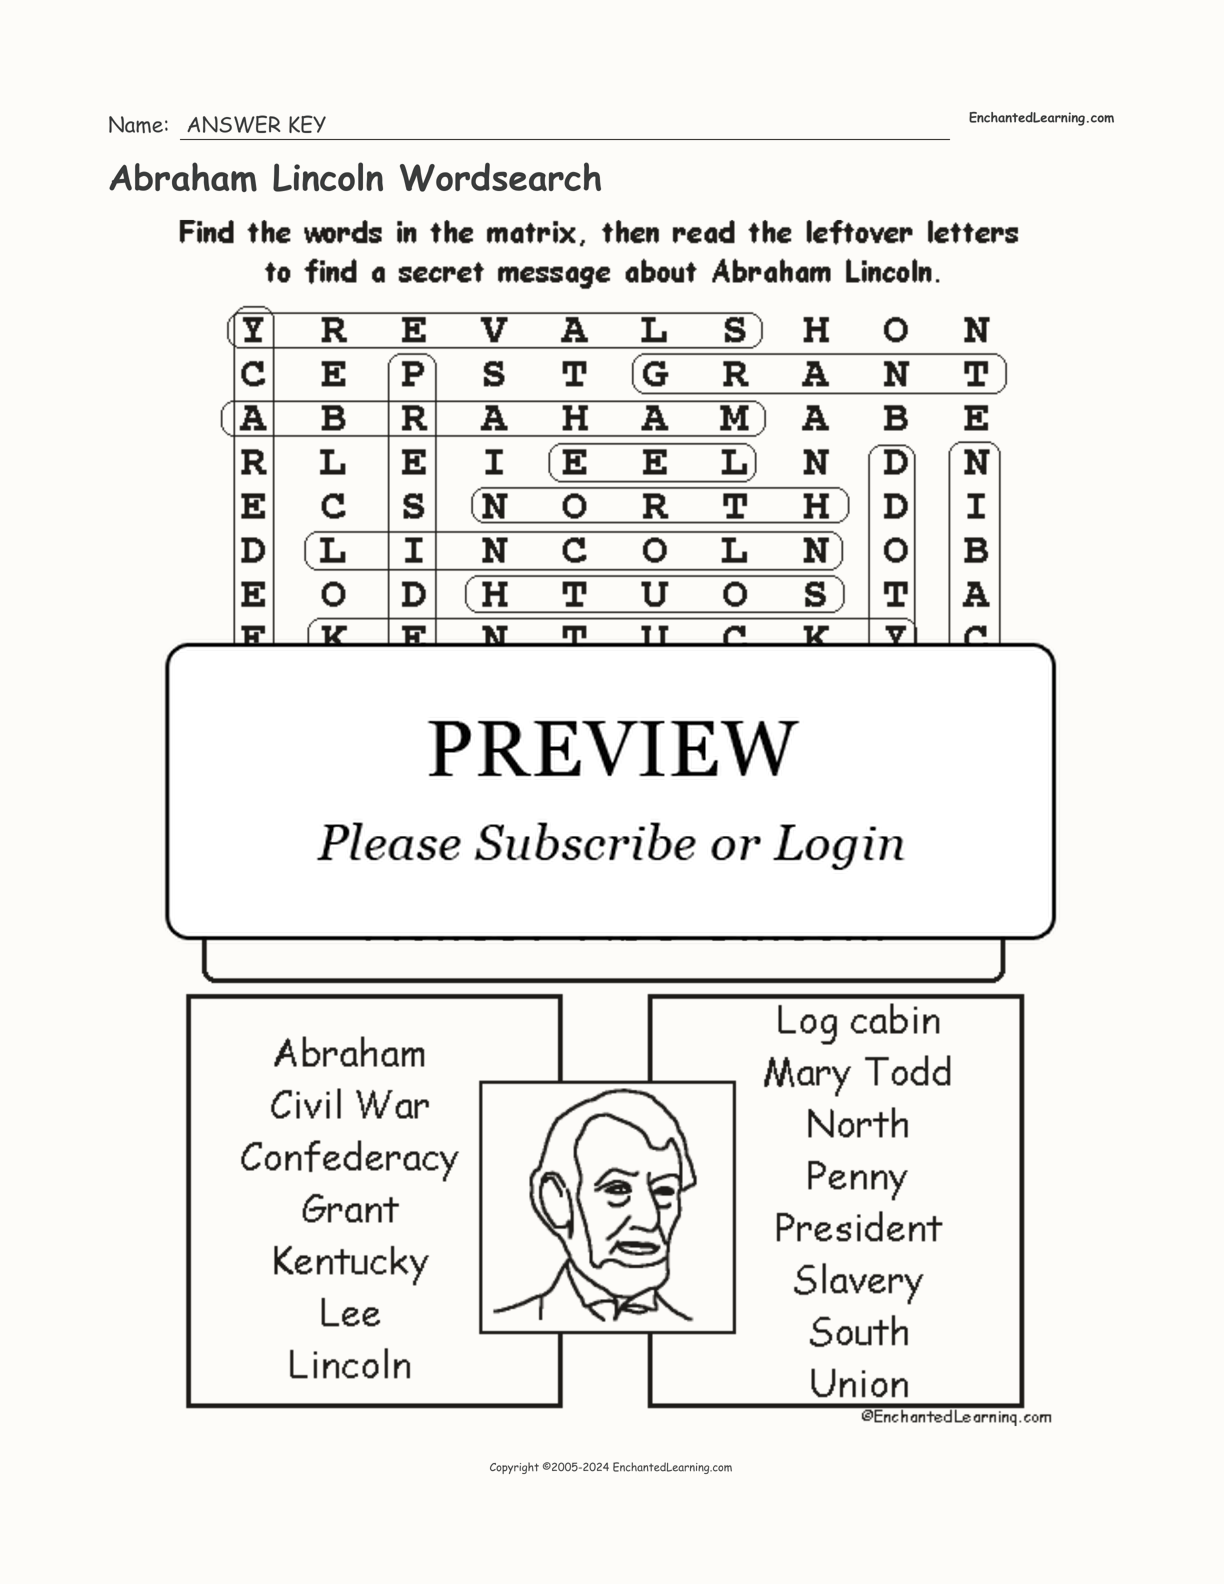 Abraham Lincoln Wordsearch Enchanted Learning